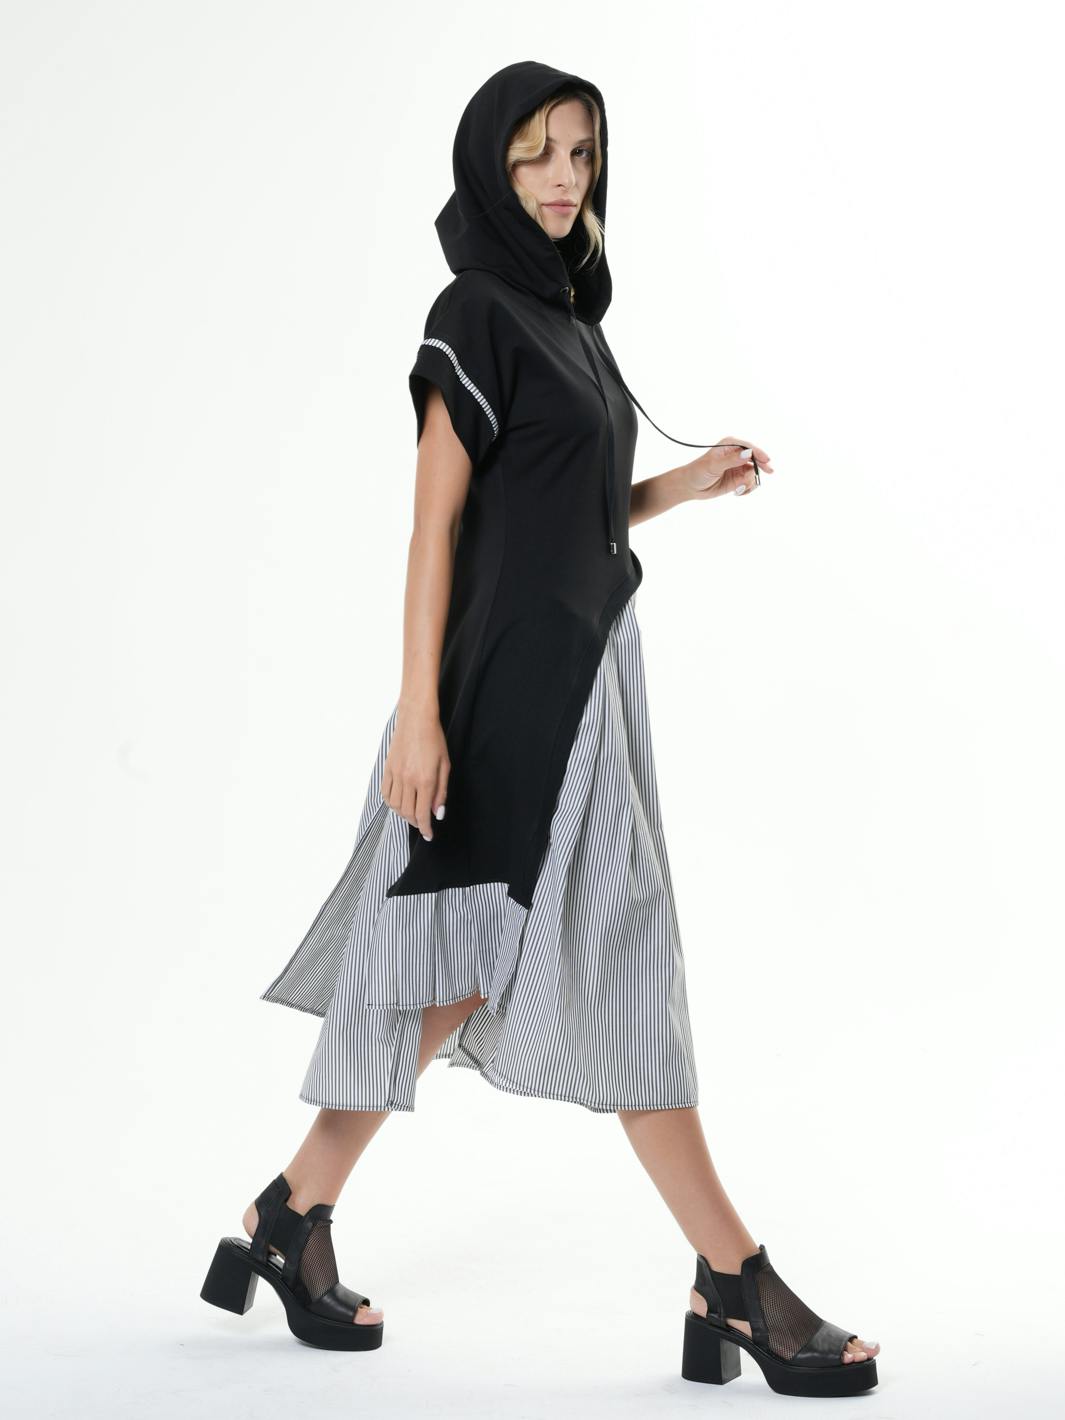 Thumbnail preview #4 for Asymmetric Hooded Dress With Short Sleeves 